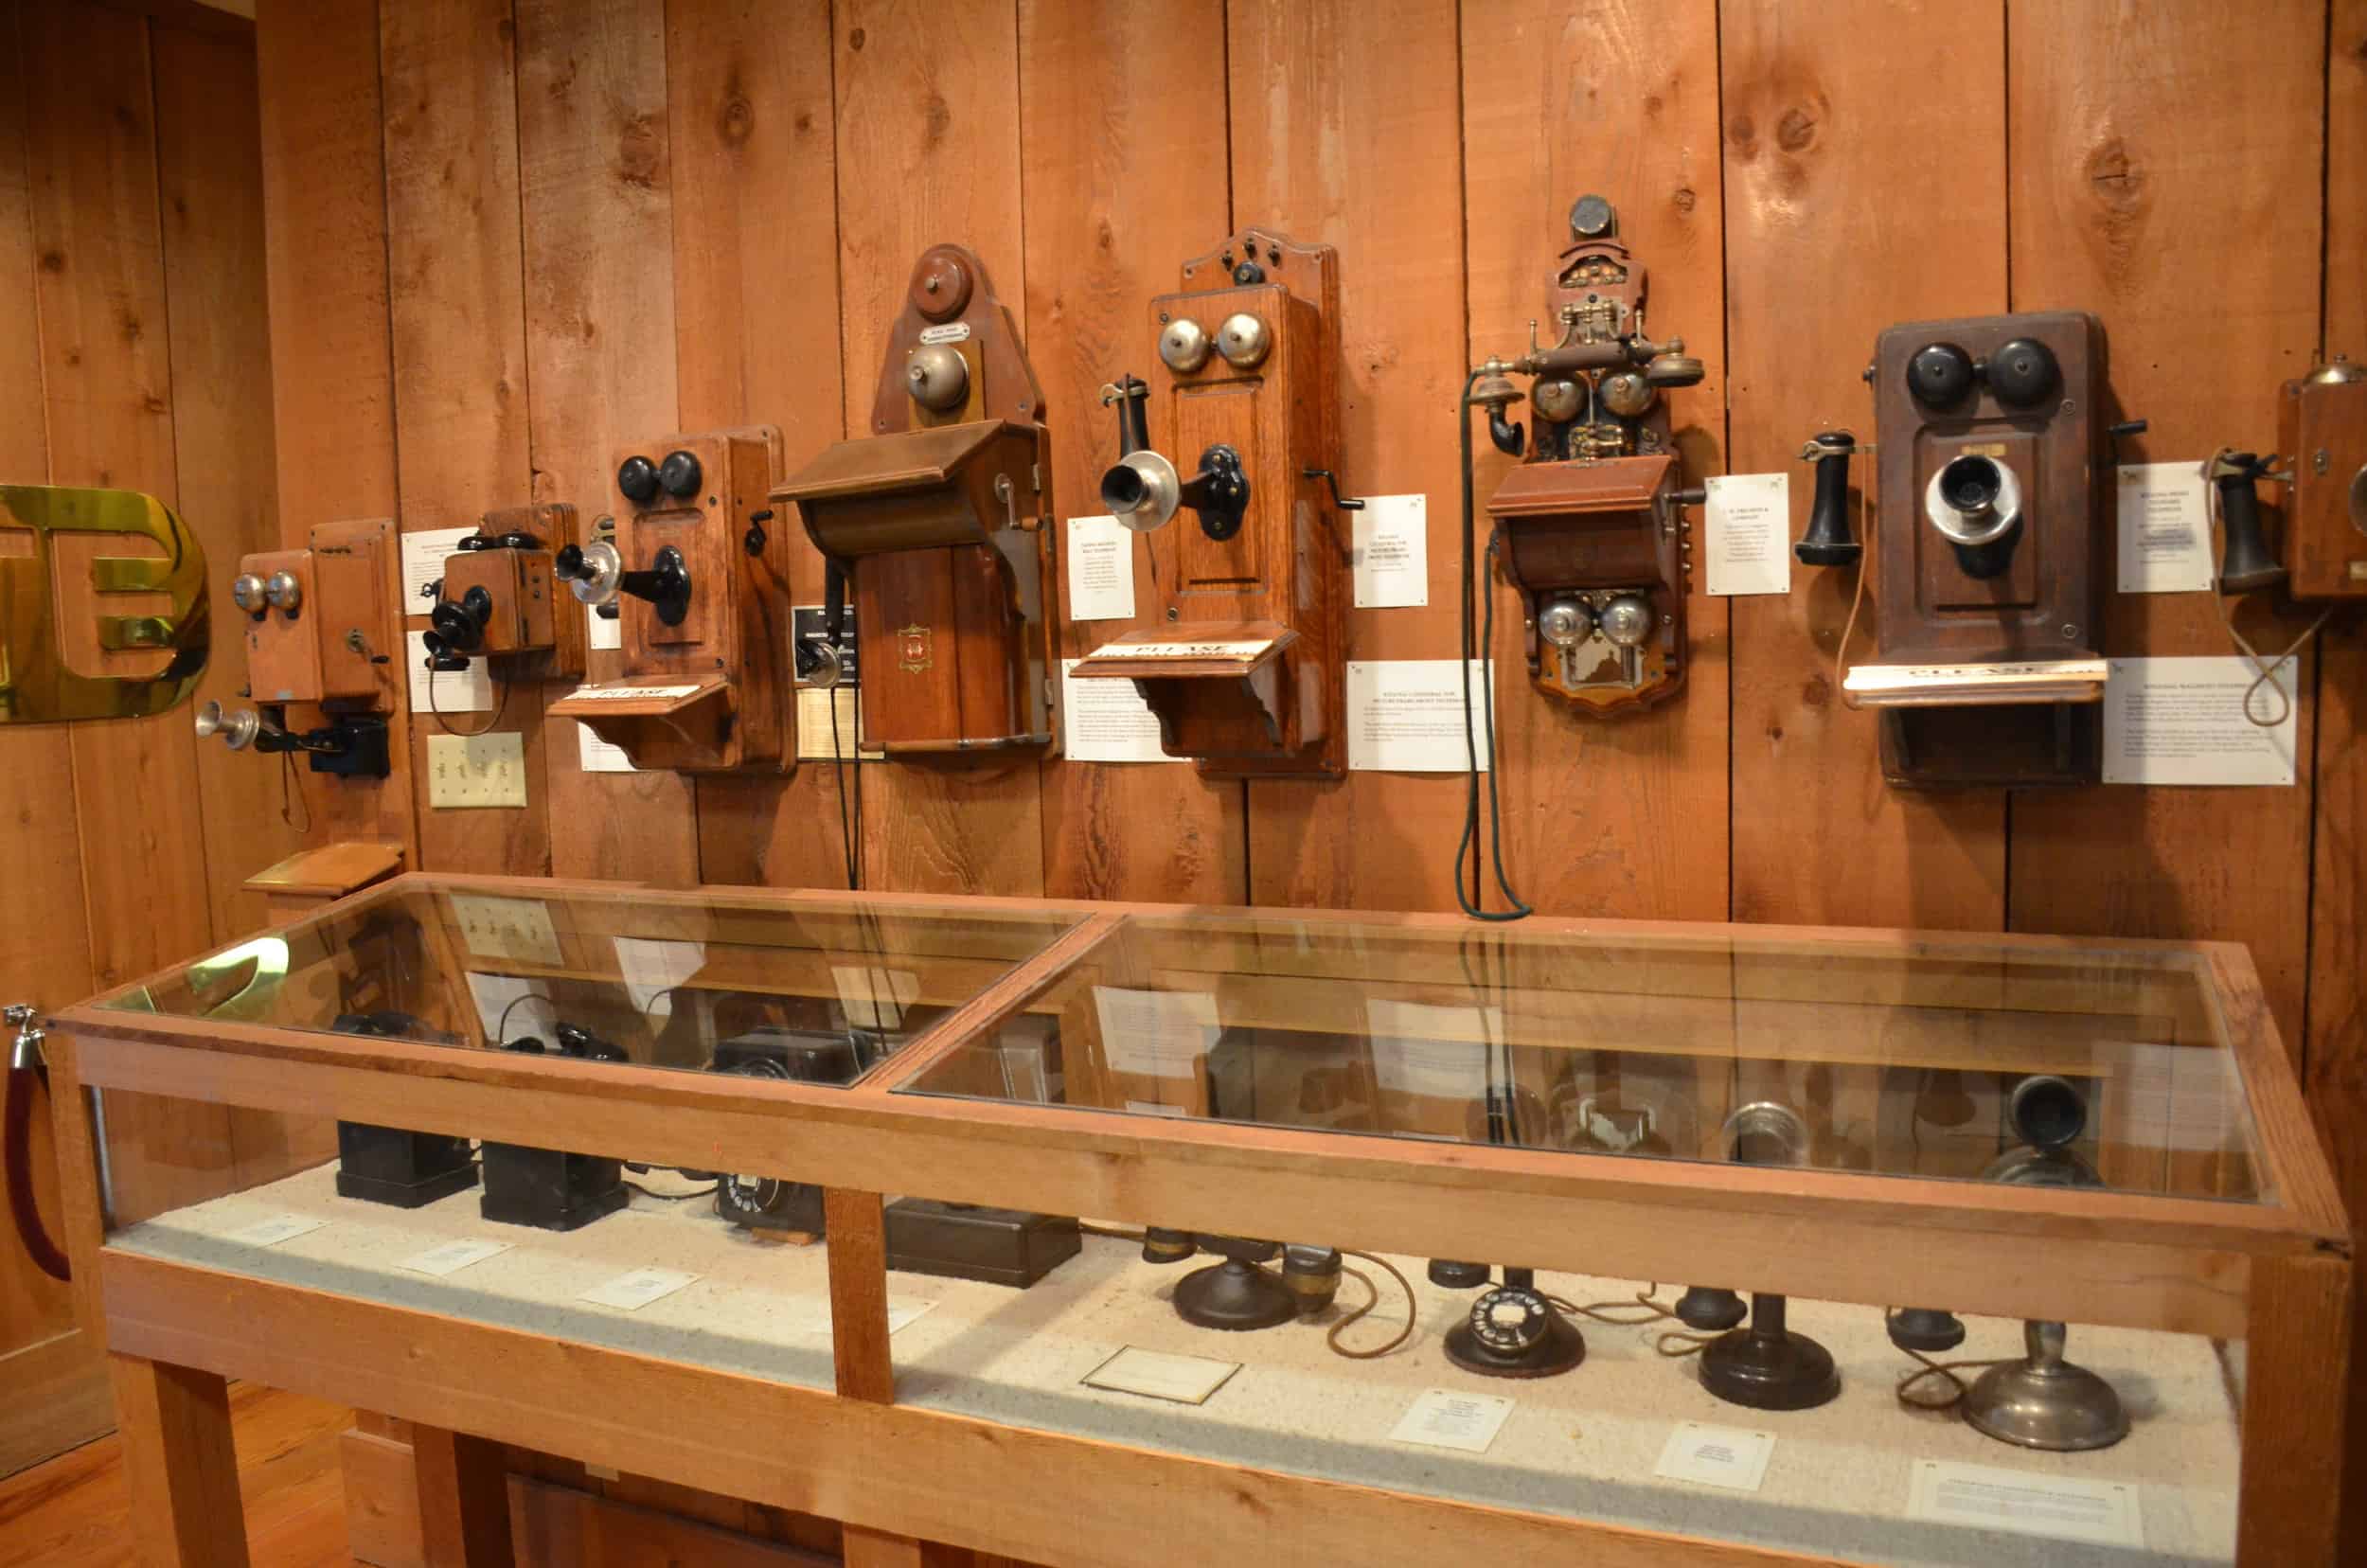 E.H. Danner Museum of Telephony at Fort Concho in San Angelo, Texas